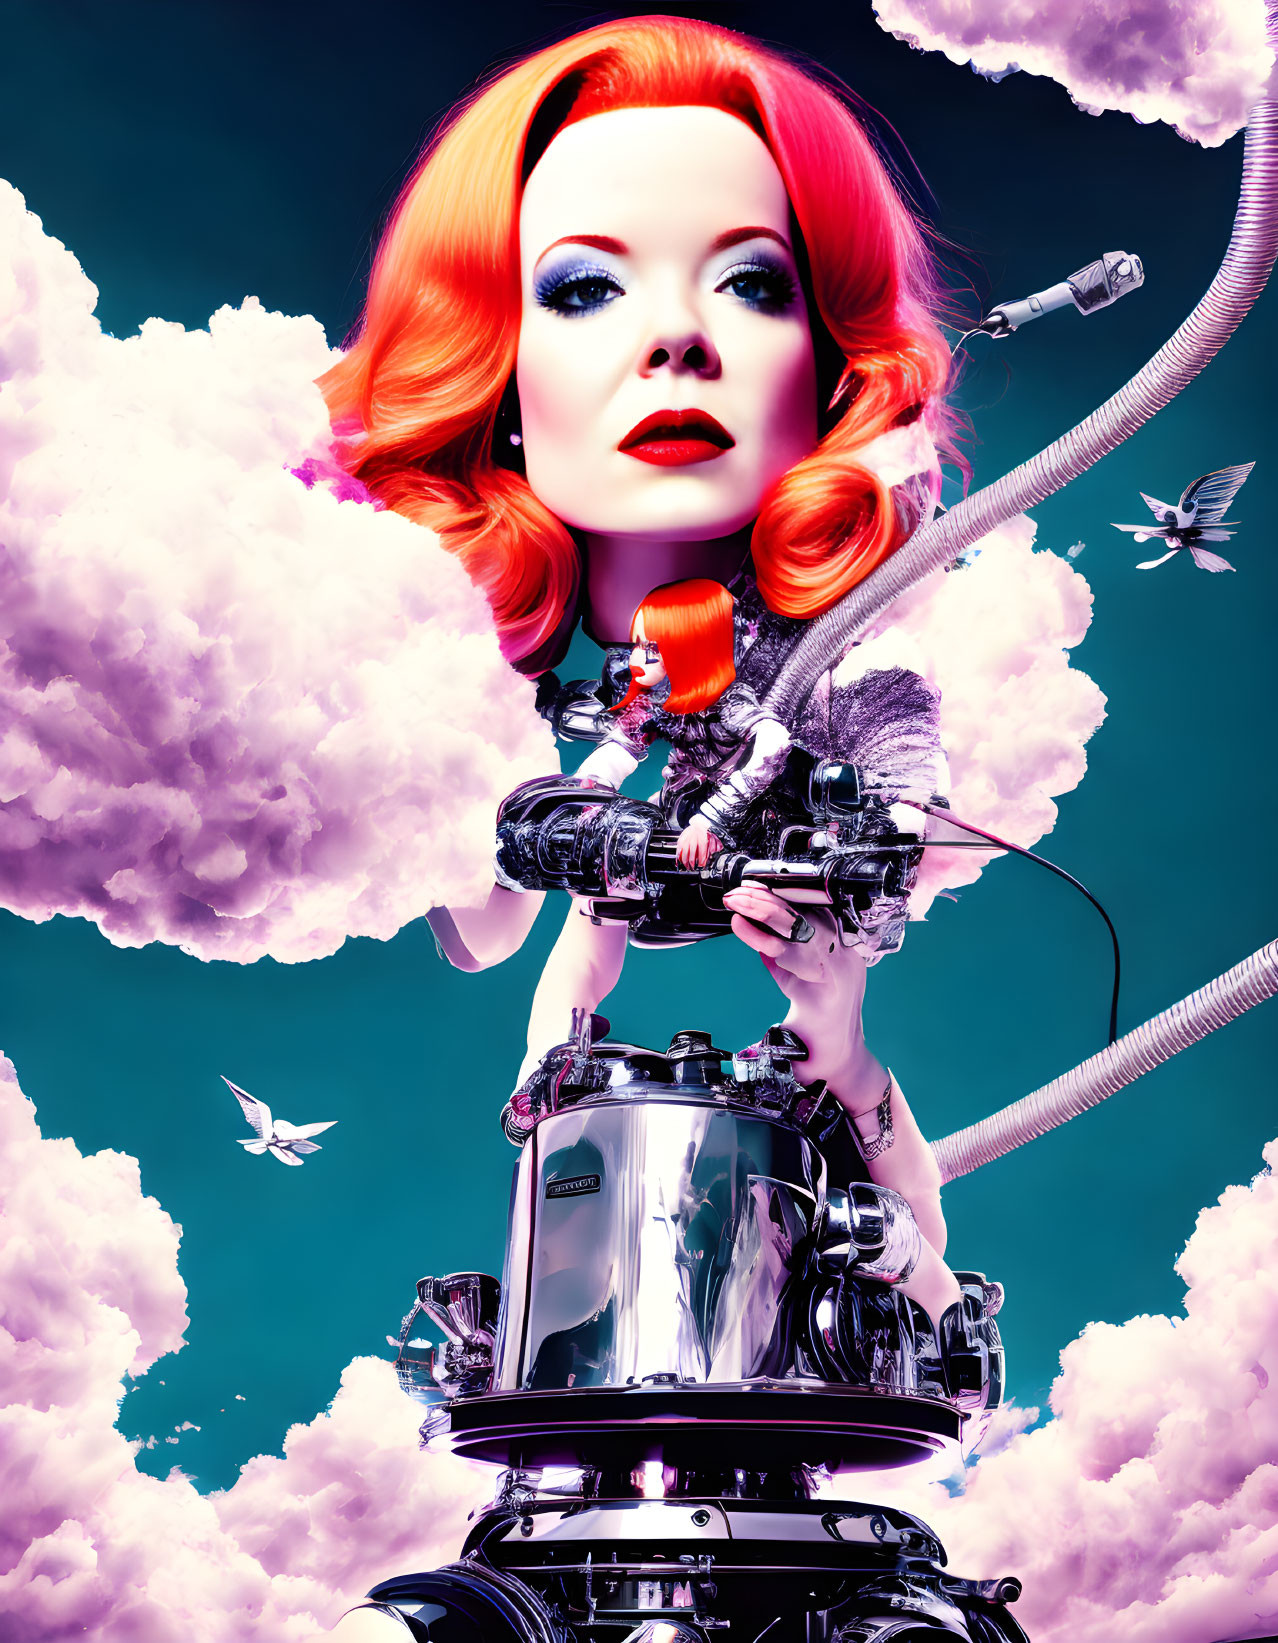 Bright Red-Haired Woman on Chrome Machinery Amidst Clouds and Butterflies